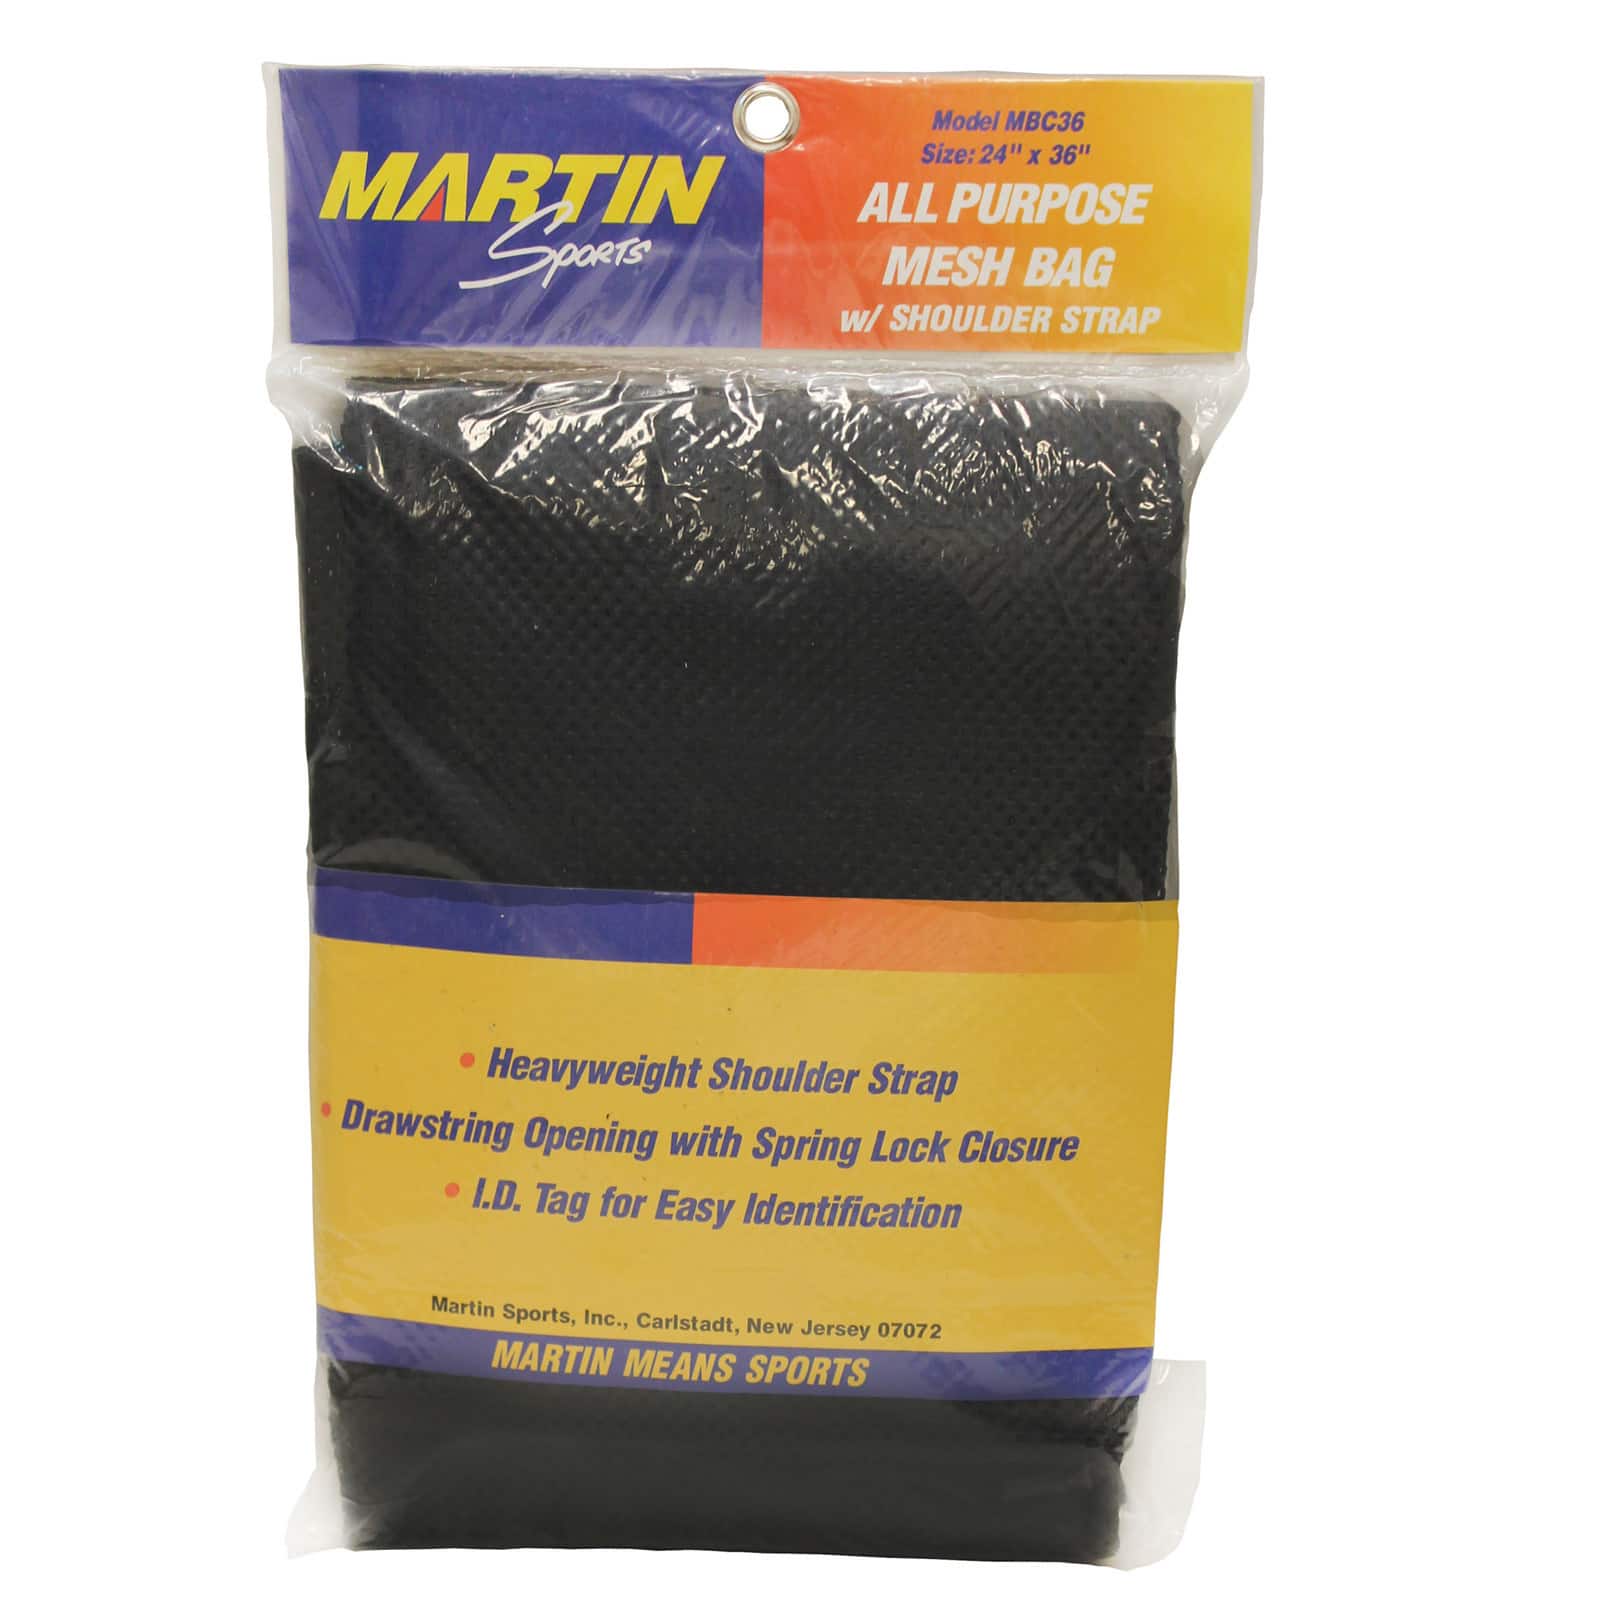 Get the Dick Martin Sports Black All Purpose Mesh Bag with Carrying Strap, 24" x 36" at Michaels.com